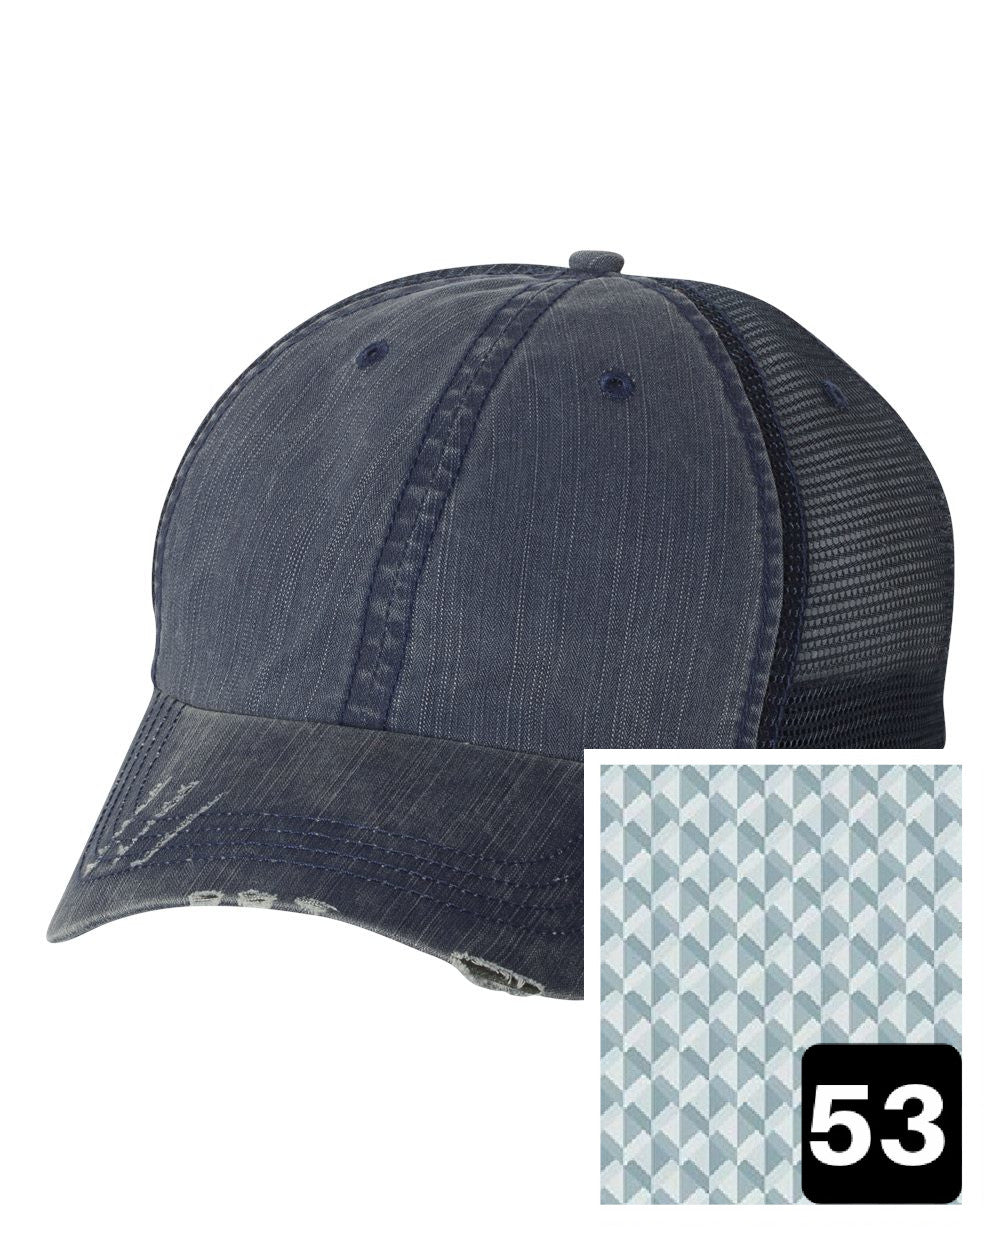 Michigan Hat | Navy Distressed Trucker Cap | Many Fabric Choices